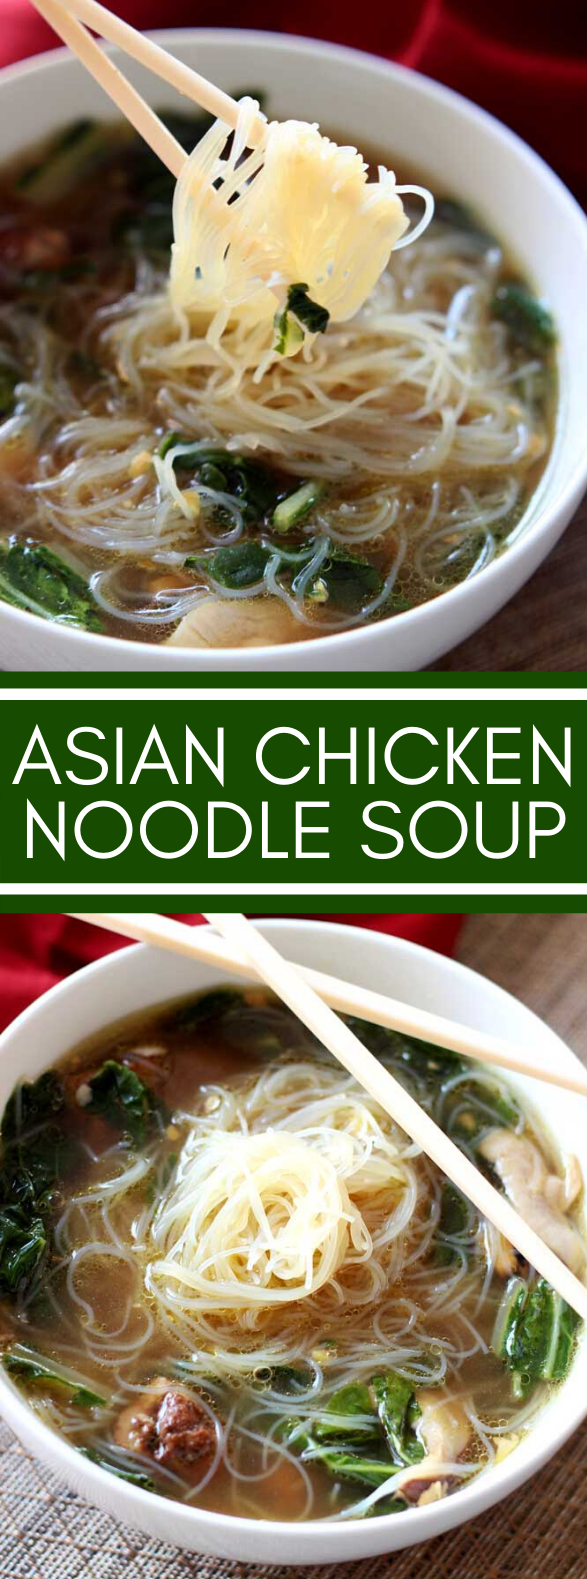 Asian Chicken Noodle Soup #glutenfree #healthy